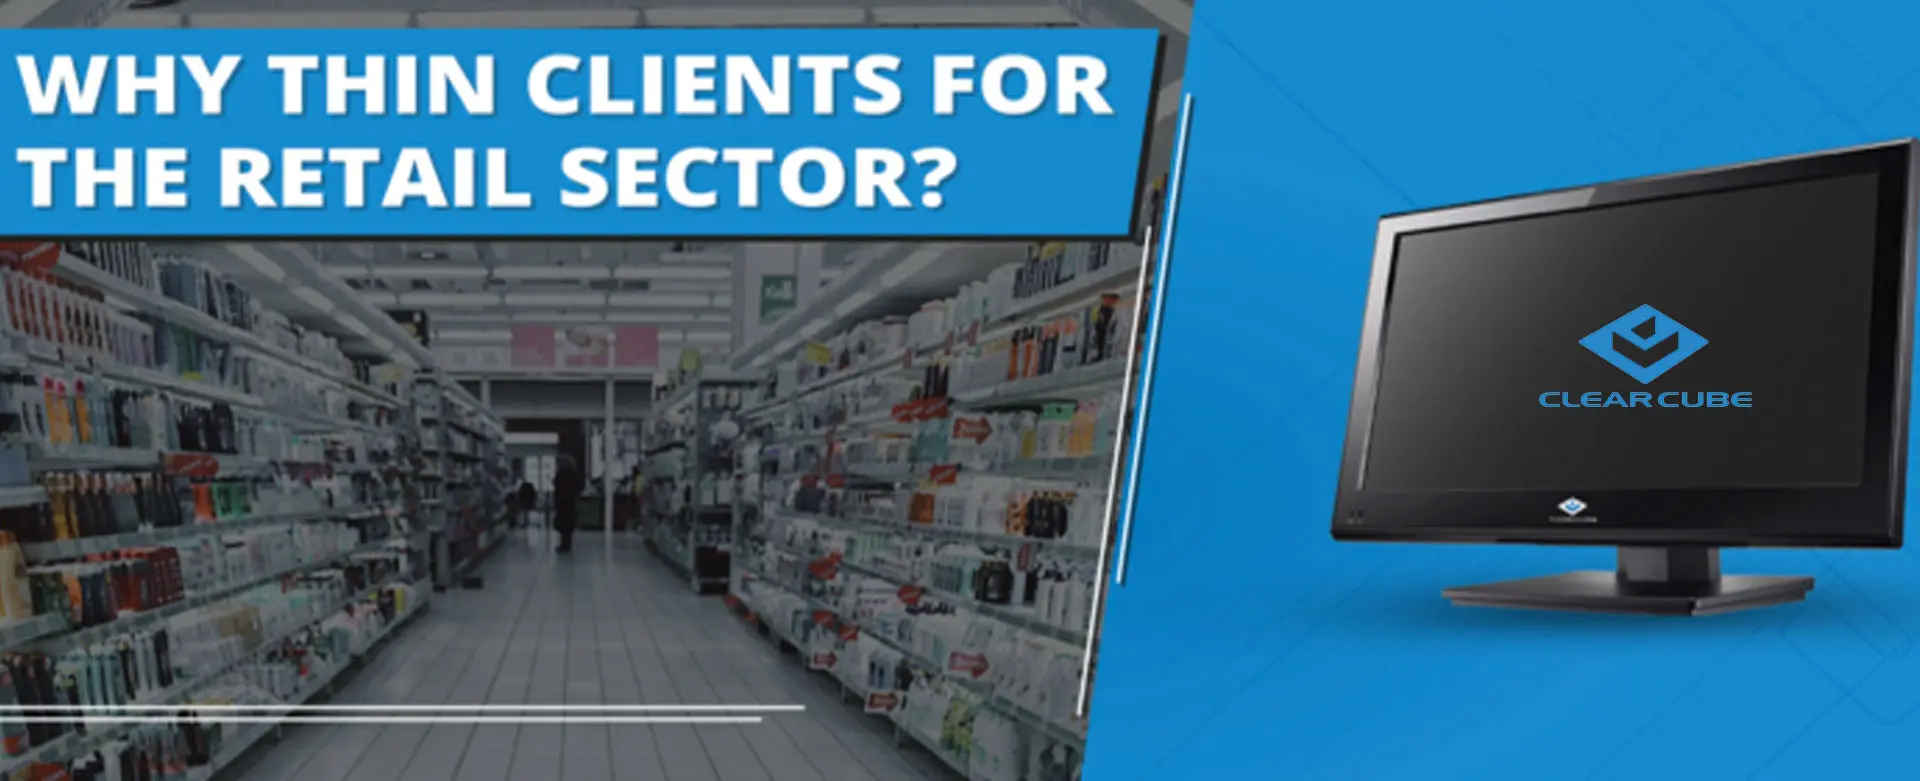 Why Thin Clients for the Retail Sector?